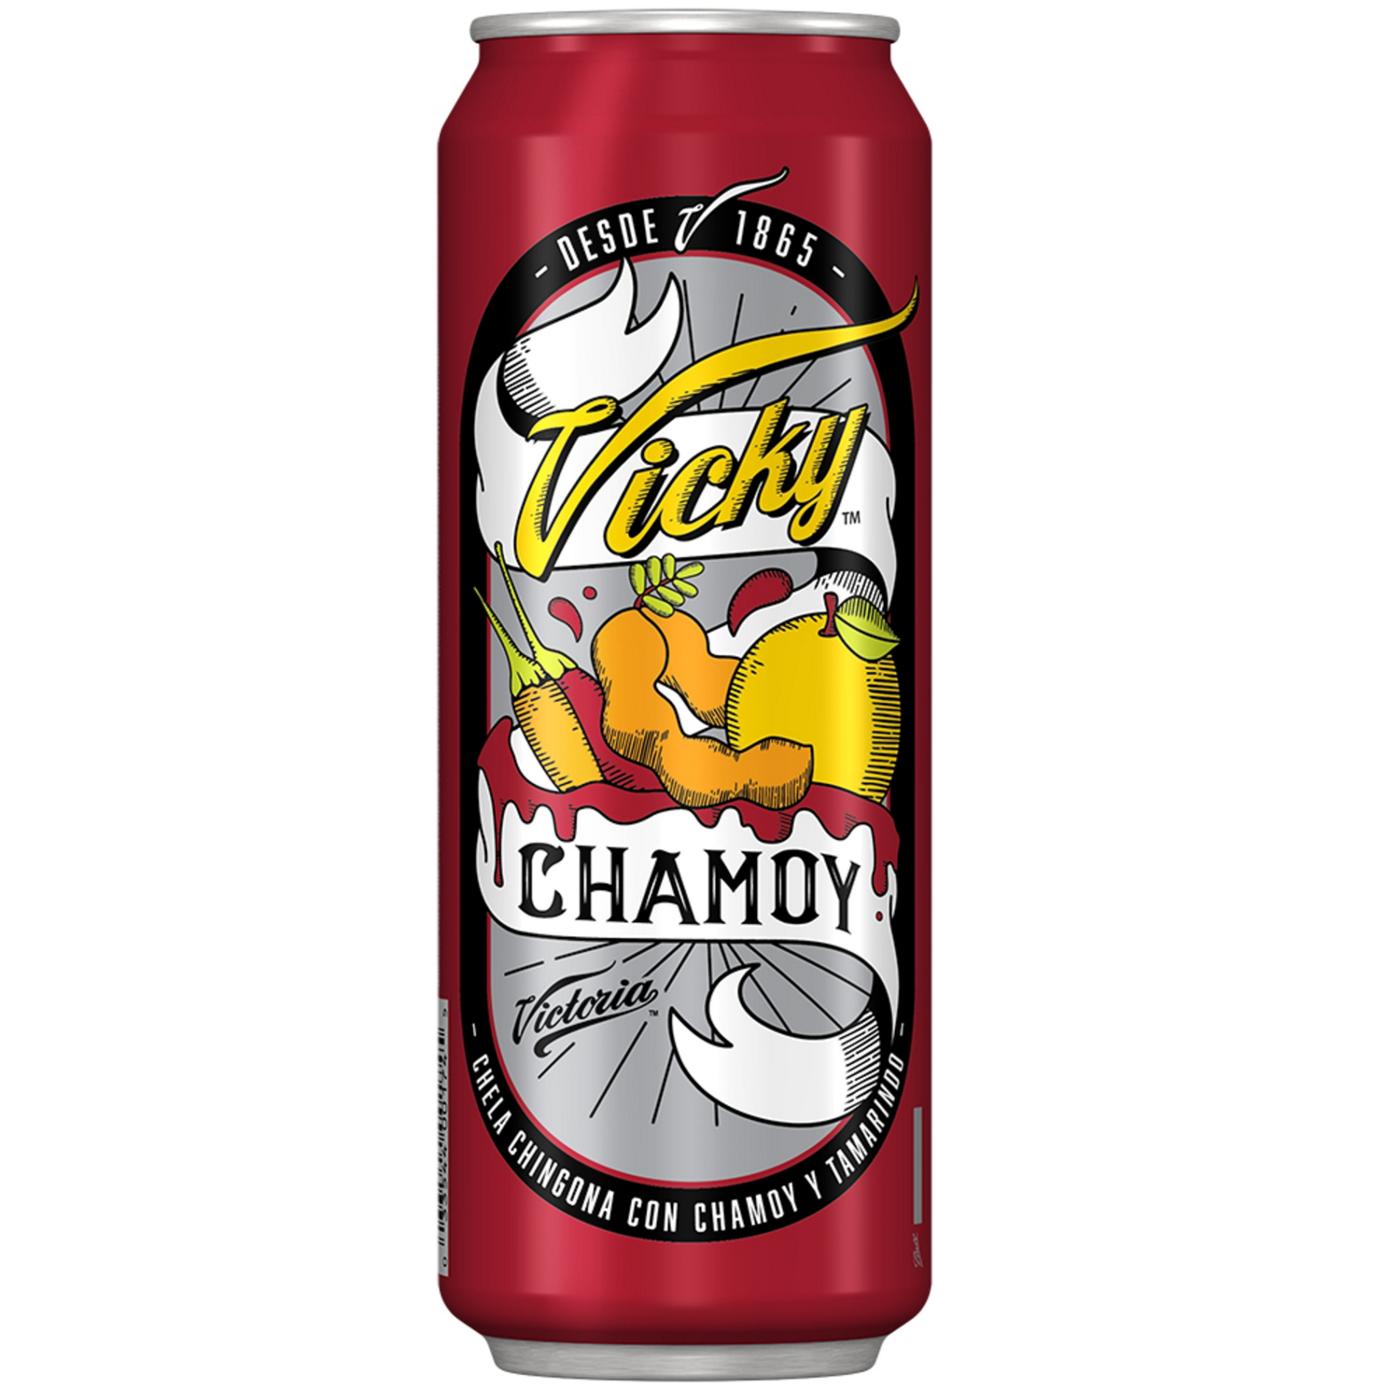 Victoria Vicky Chamoy Mexican Flavored Beer 24 oz Can; image 1 of 9